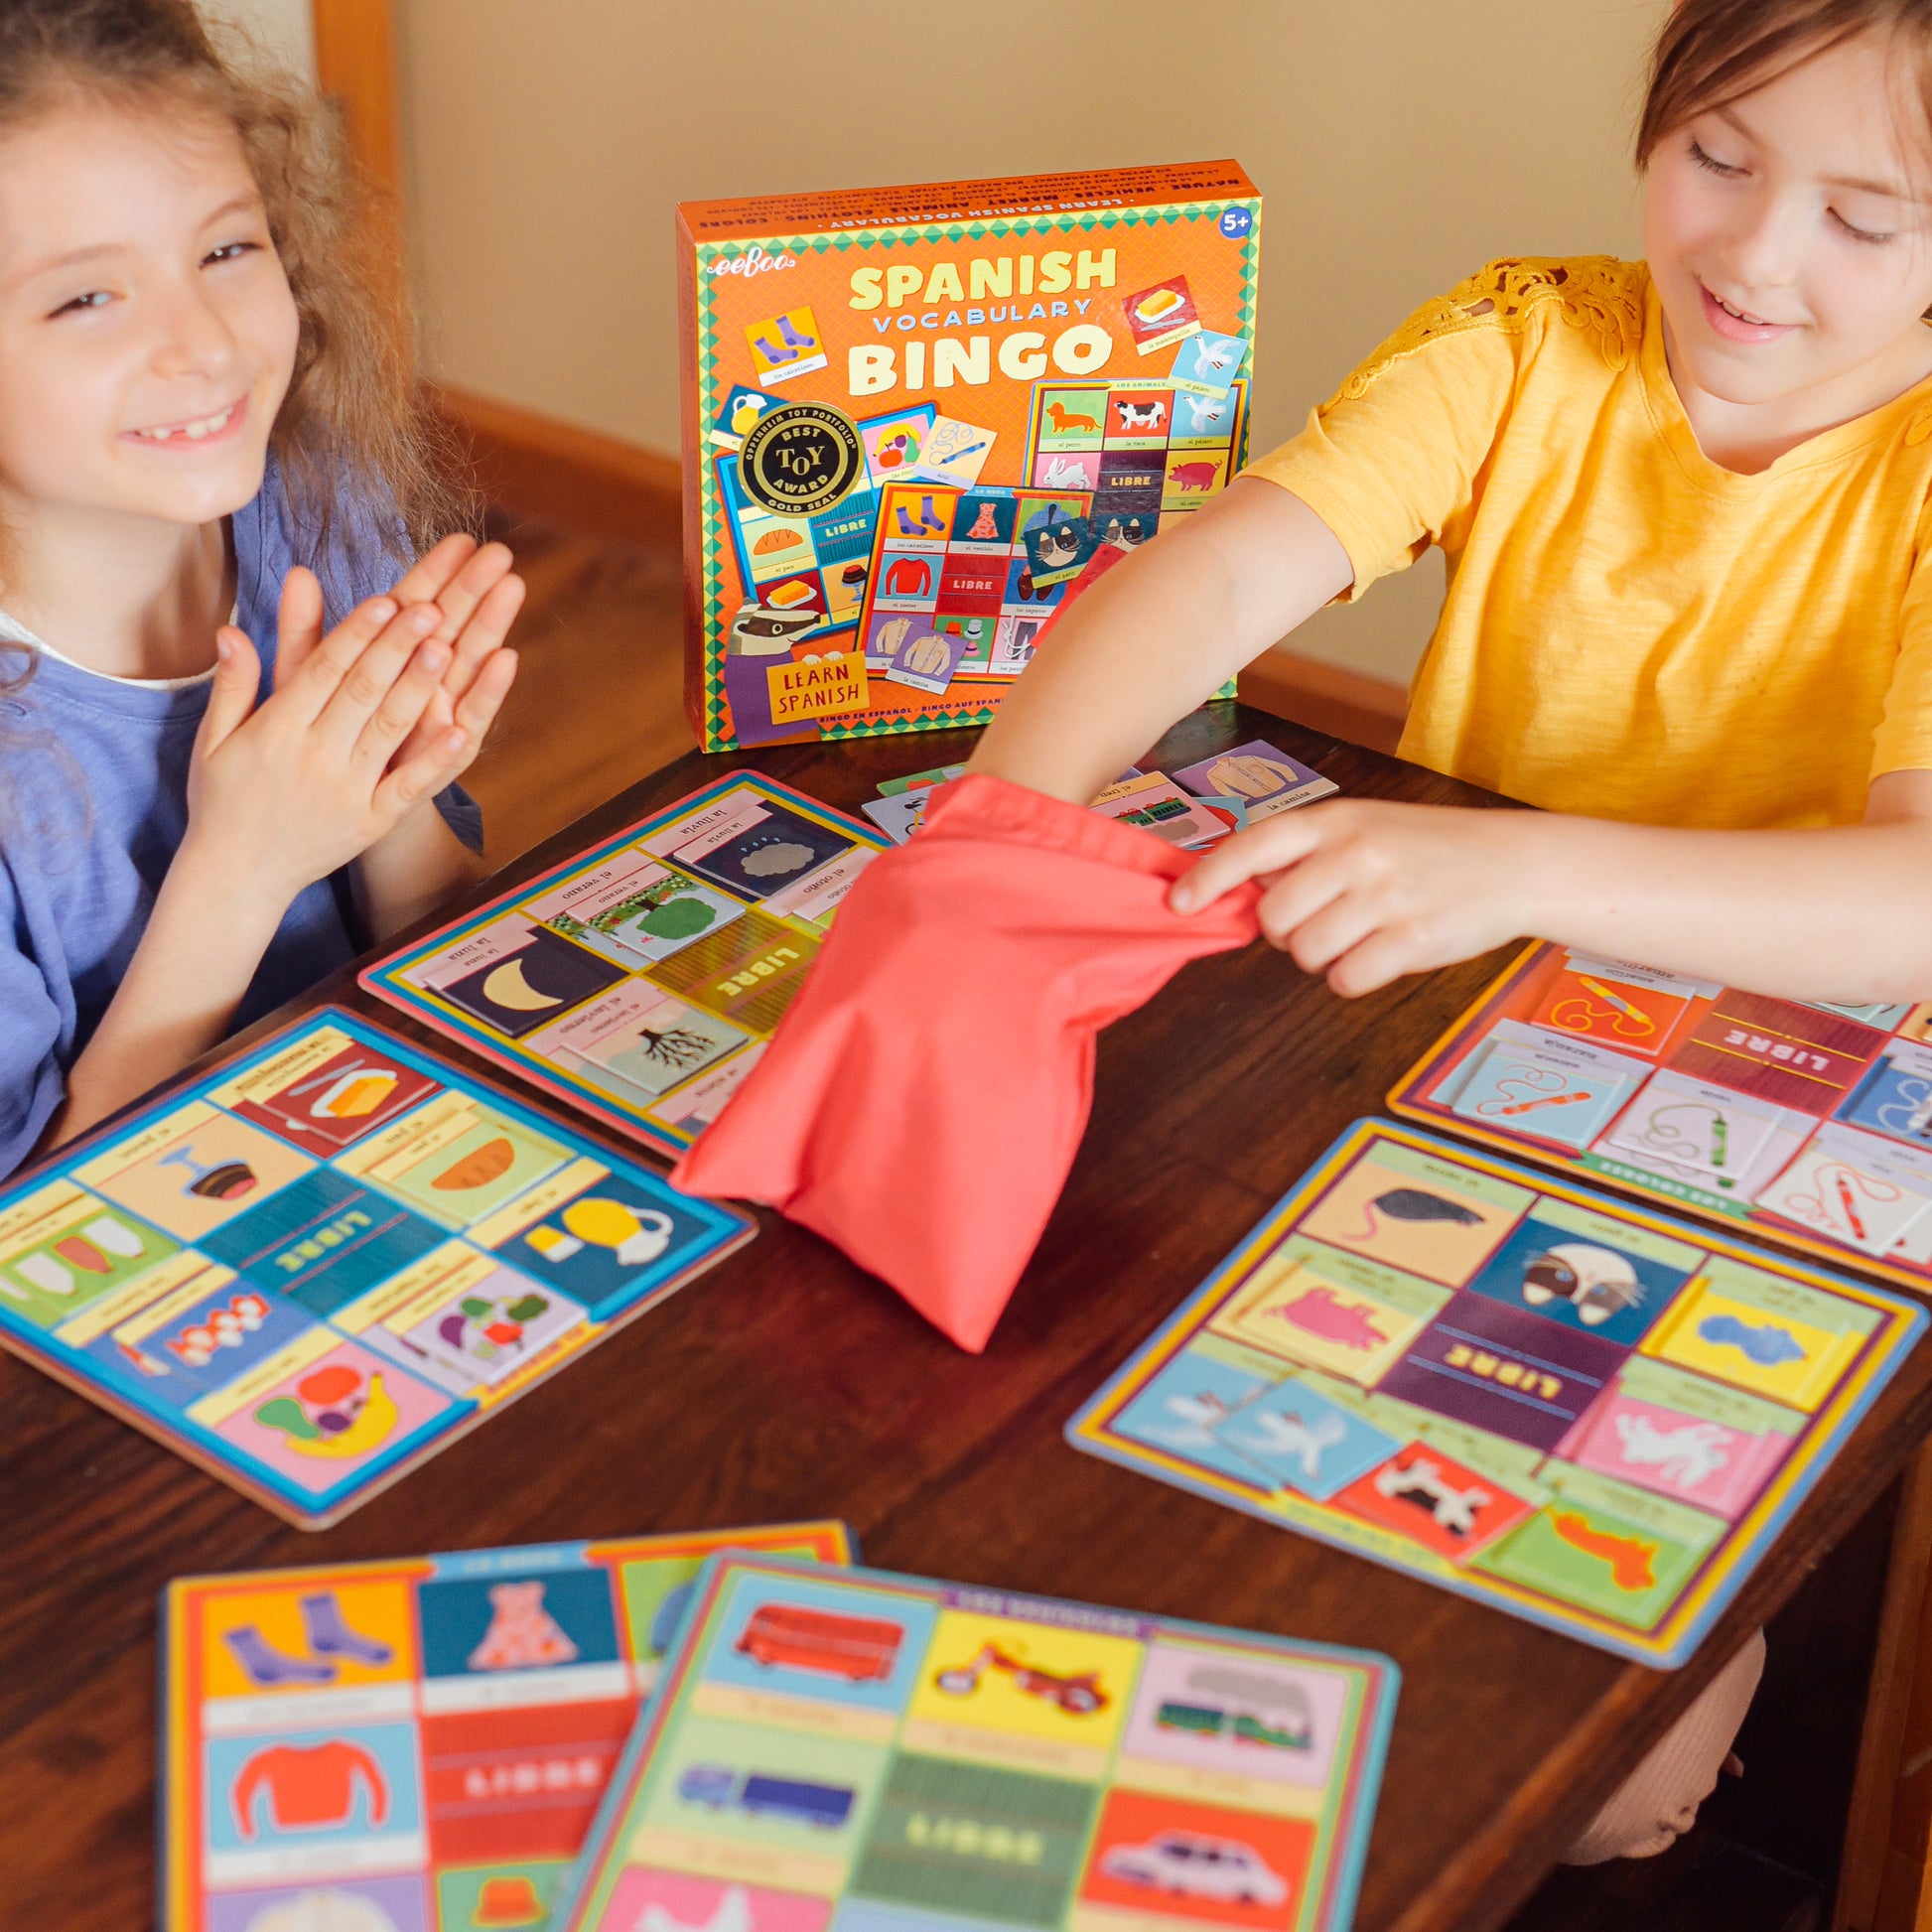 Learn English and Spanish Vocabulary with These Bilingual Versions of Bingo  - The Toy Insider